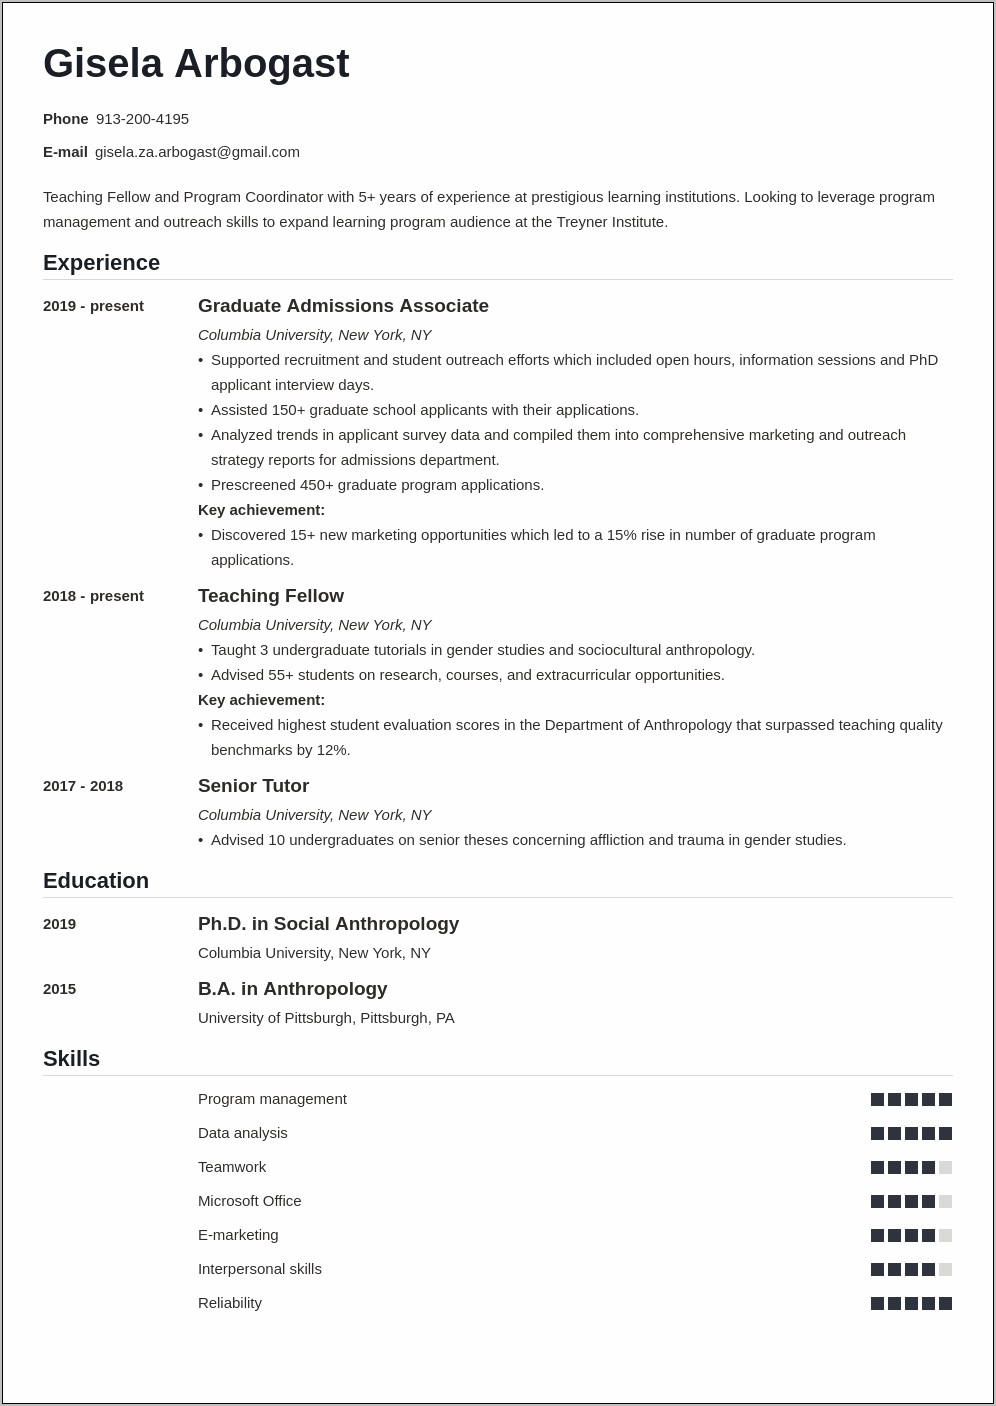 Resume Template For Doctor Of Education Candidate